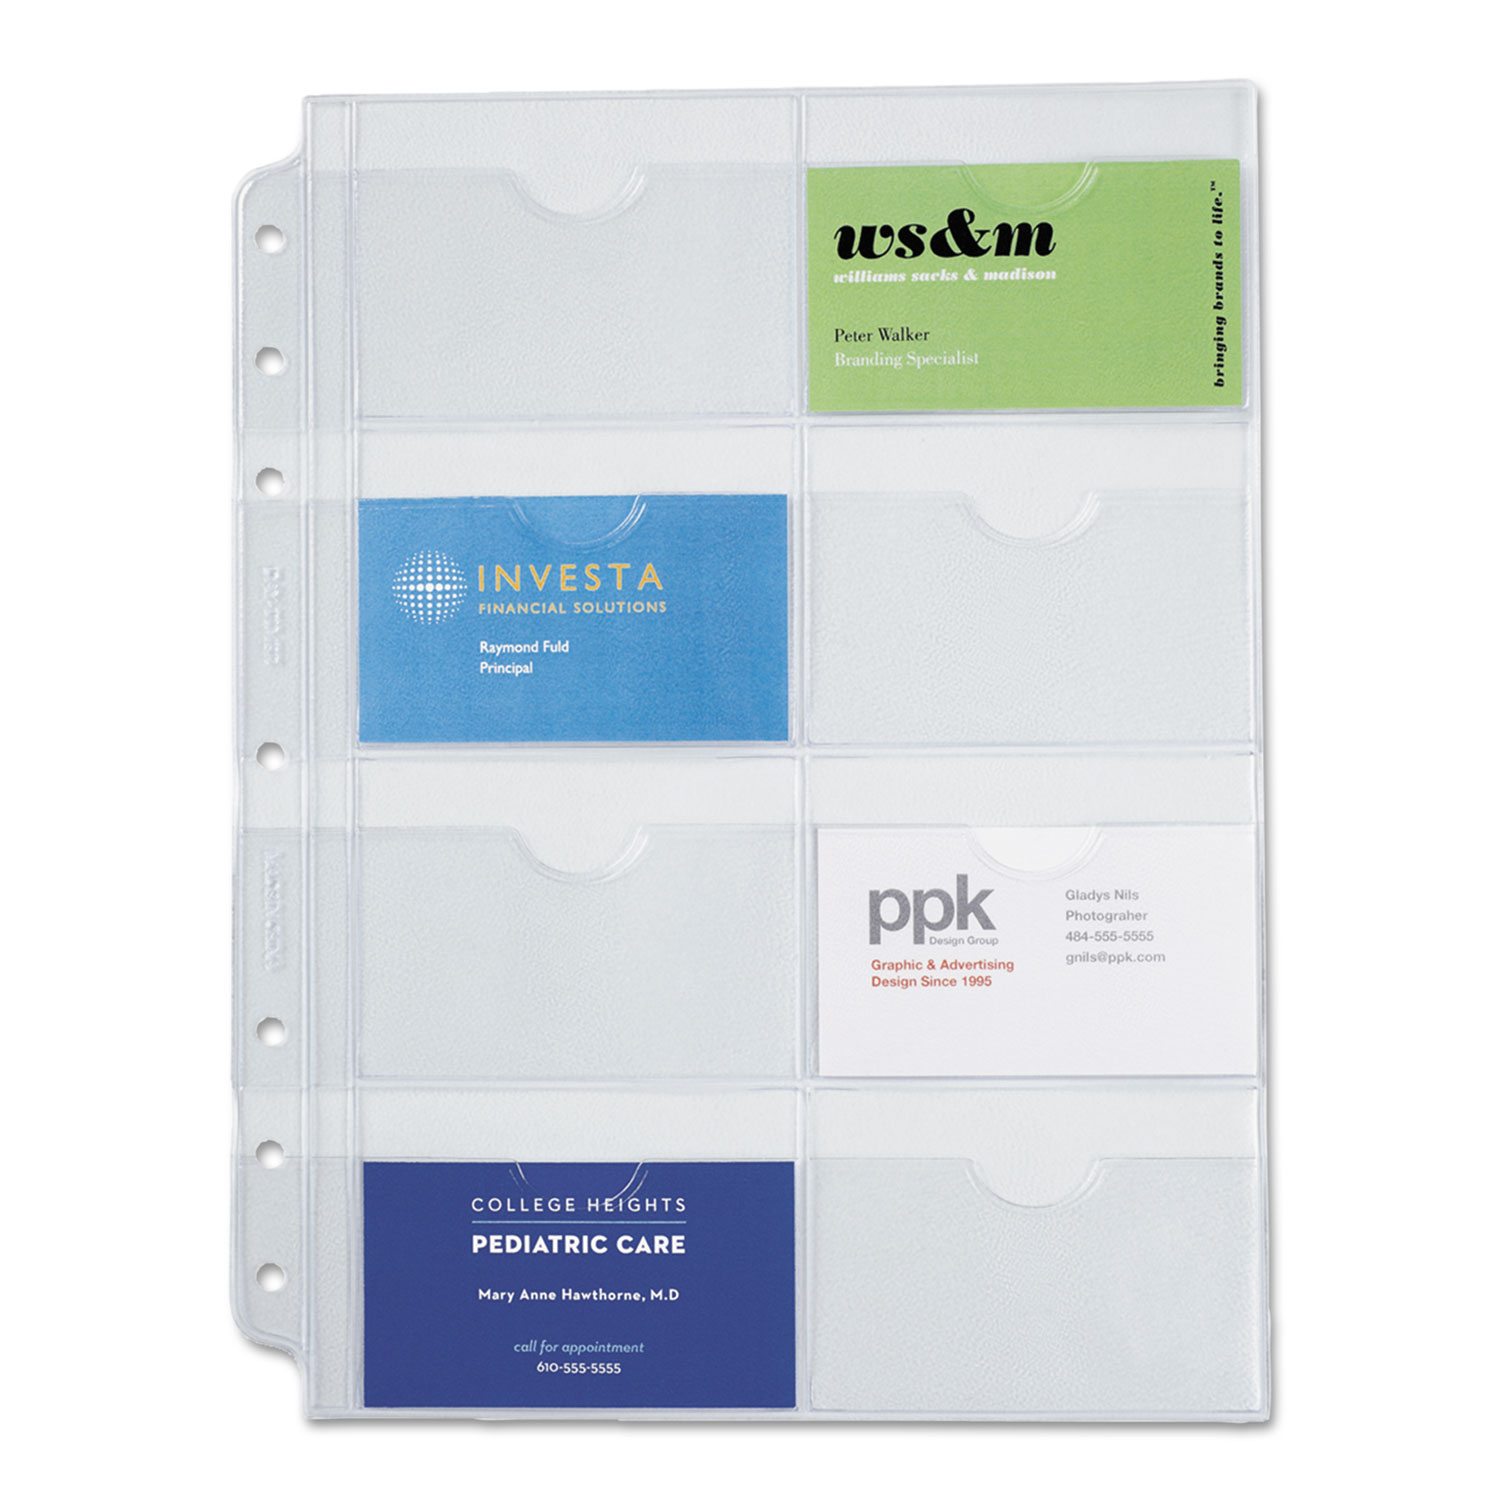  Day-Timer 87325 Business Card Holders for Looseleaf Planners, 8 1/2 x 11, 5/Pack (DTM87325) 